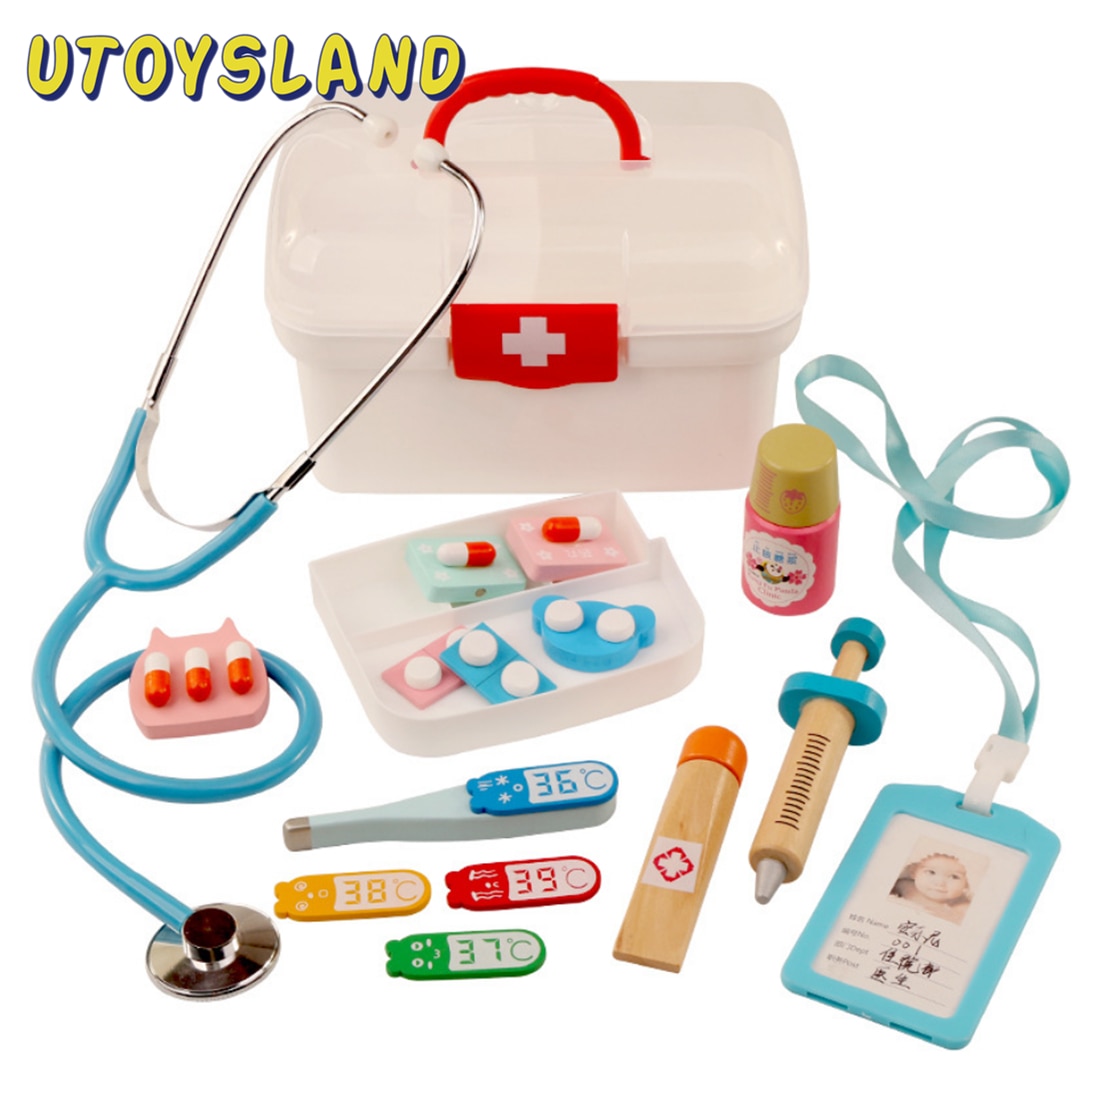 Wooden Doctor Playset - 16 Pieces for Kids' Medical Pretend Play and Interest Development